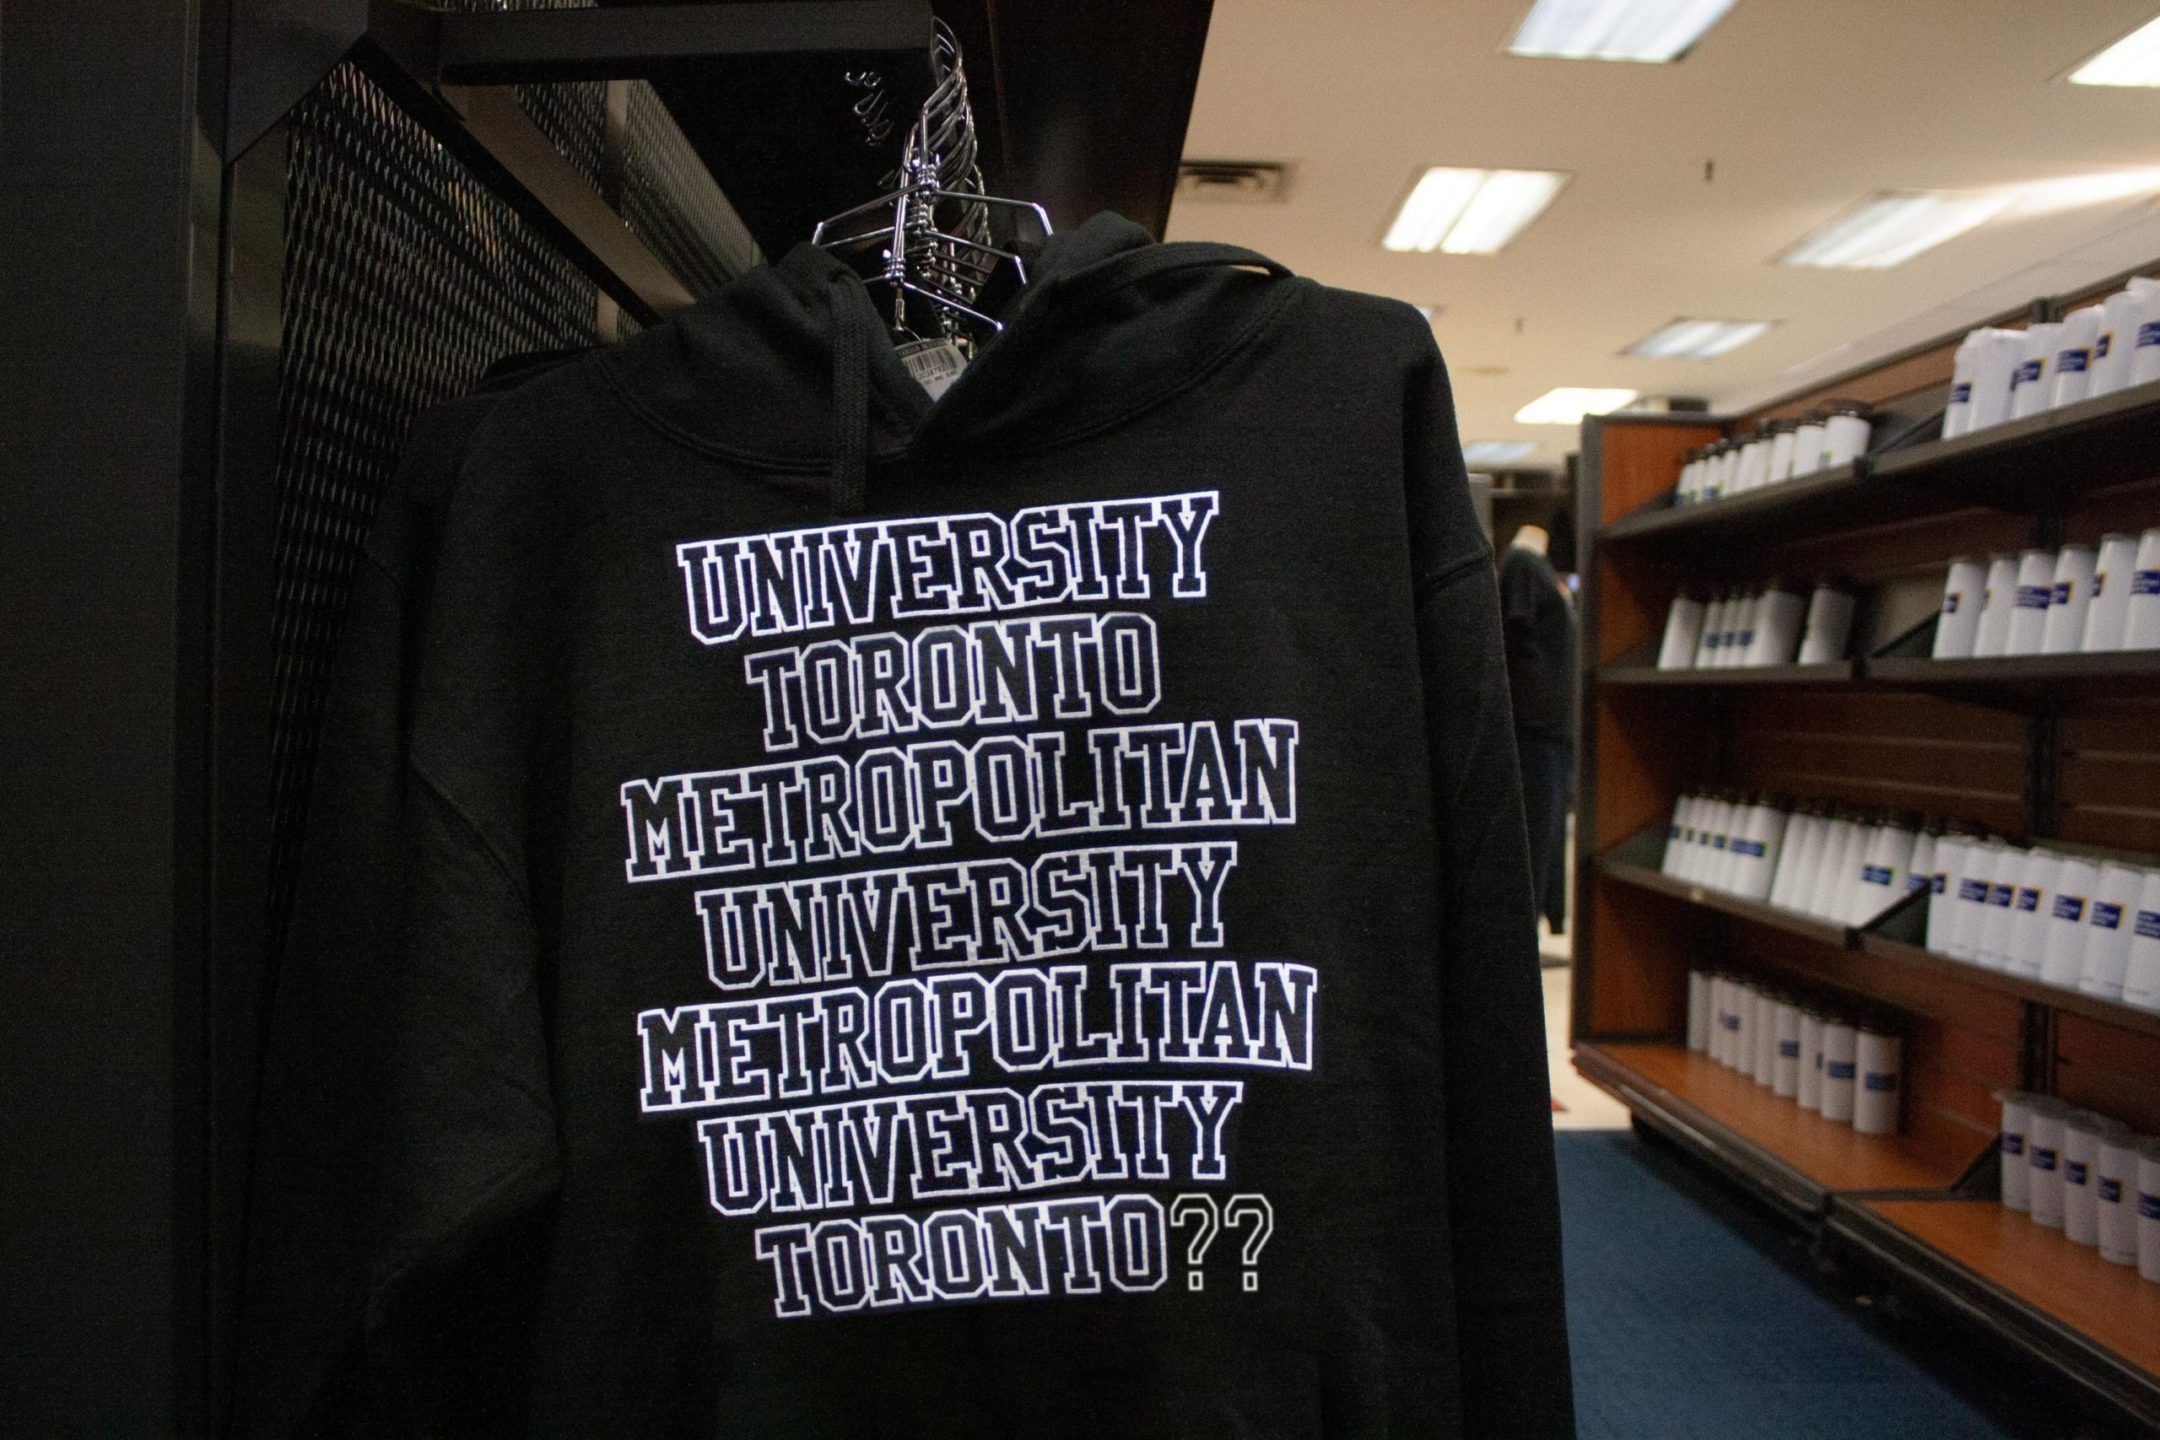 Sweater at the campus store that reads University Toronto Metropolitan University Metropolitan University Toronto question mark question mark